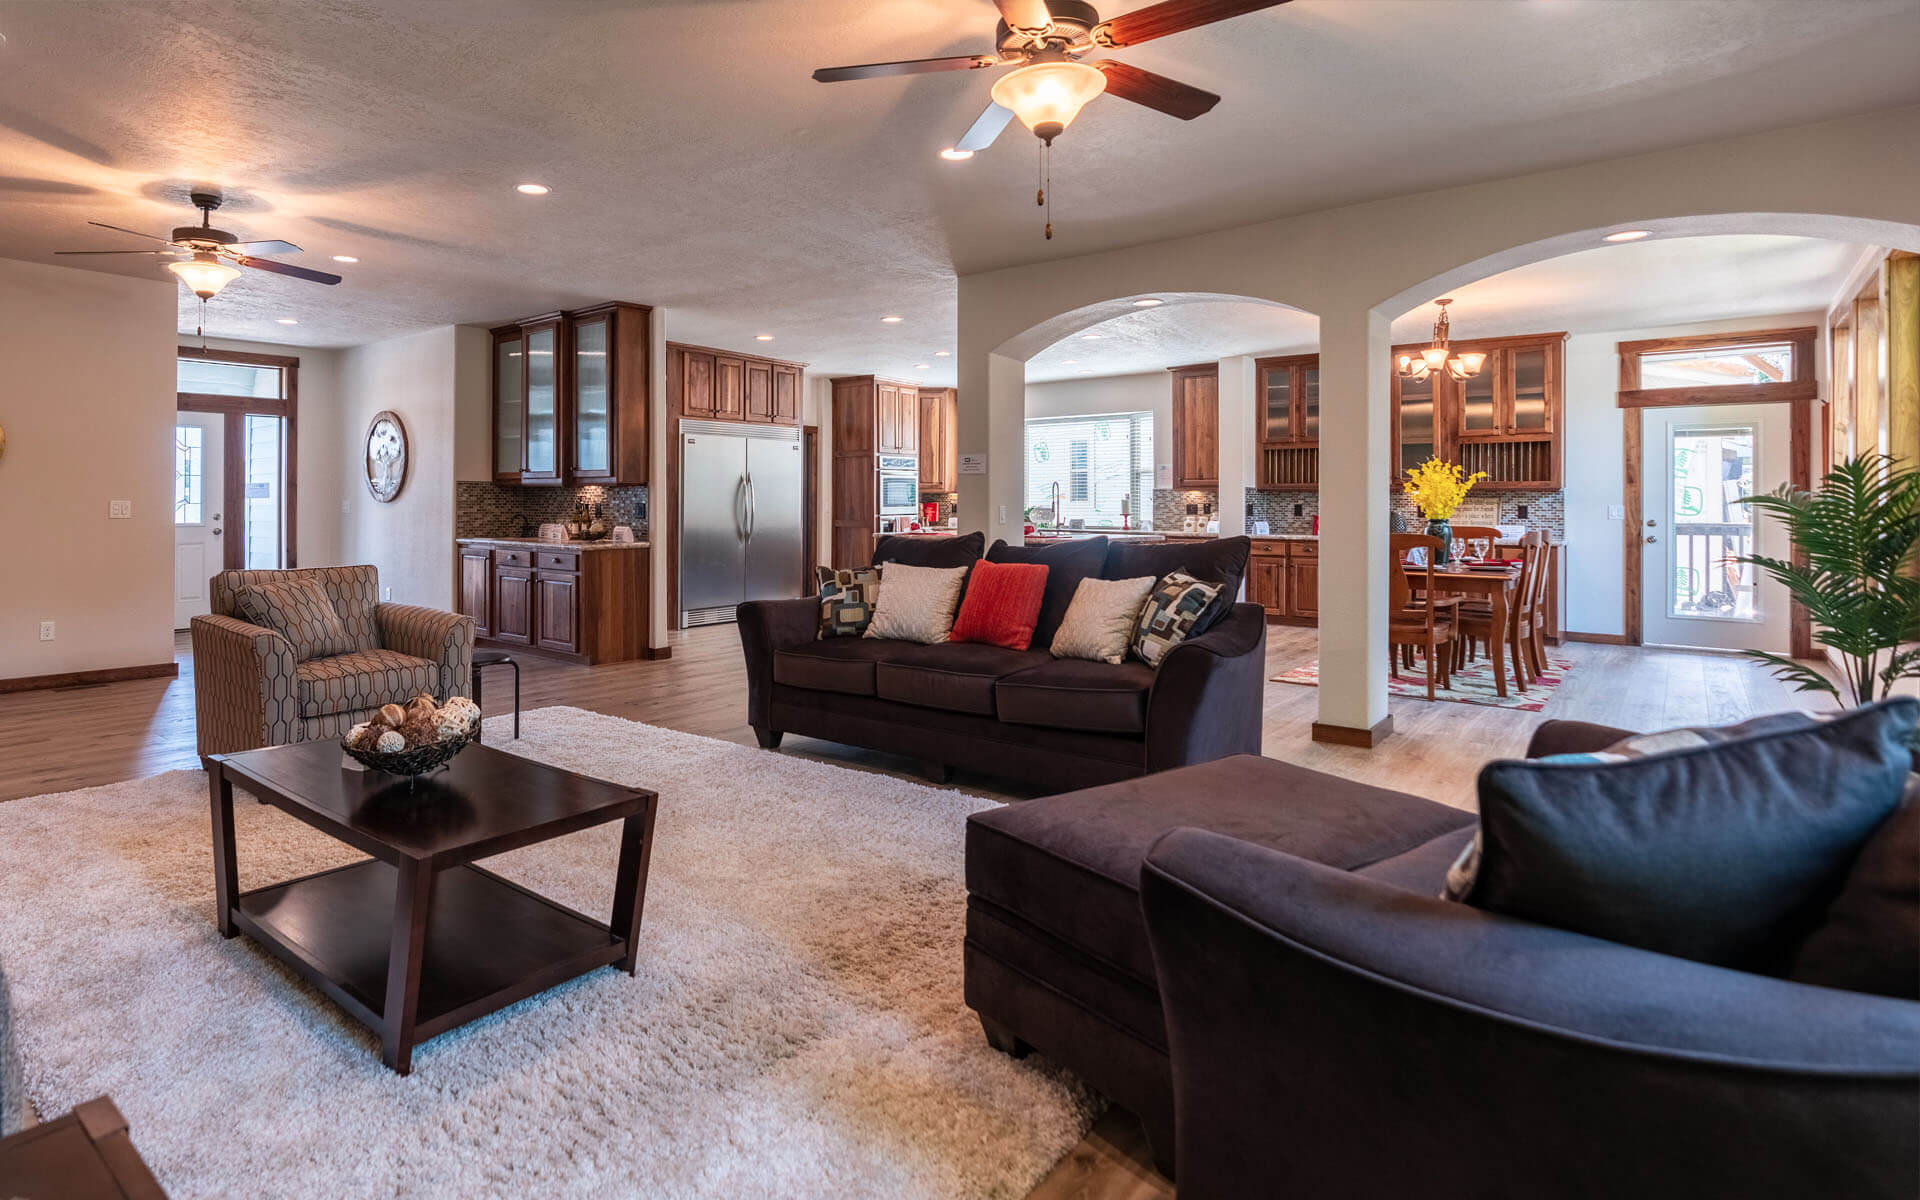 Interior photo of a manufactured home living room